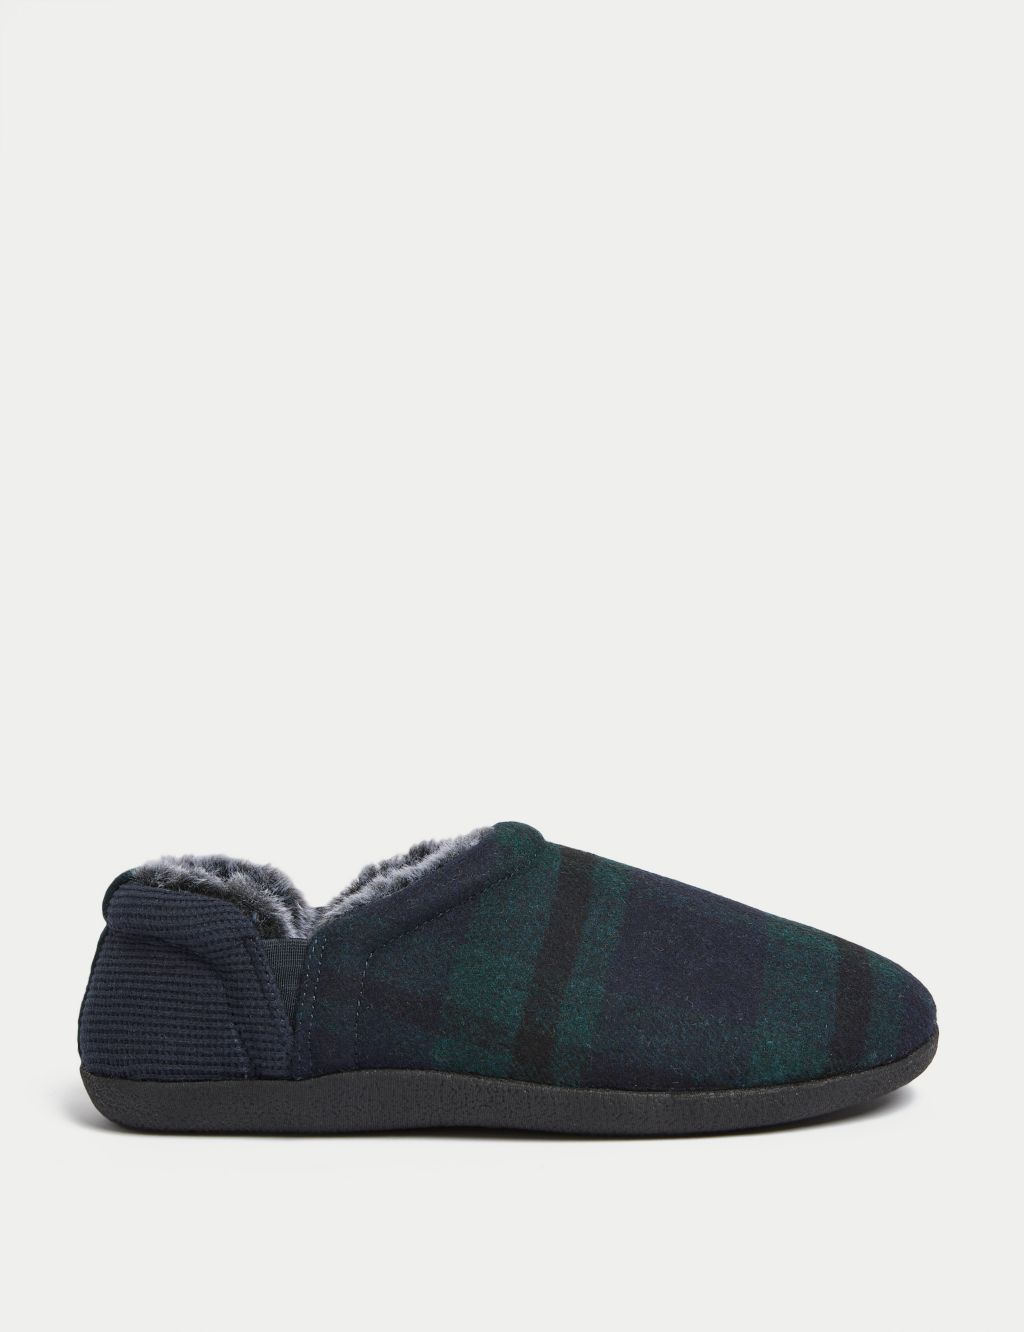 Checked Mule Slippers image 1